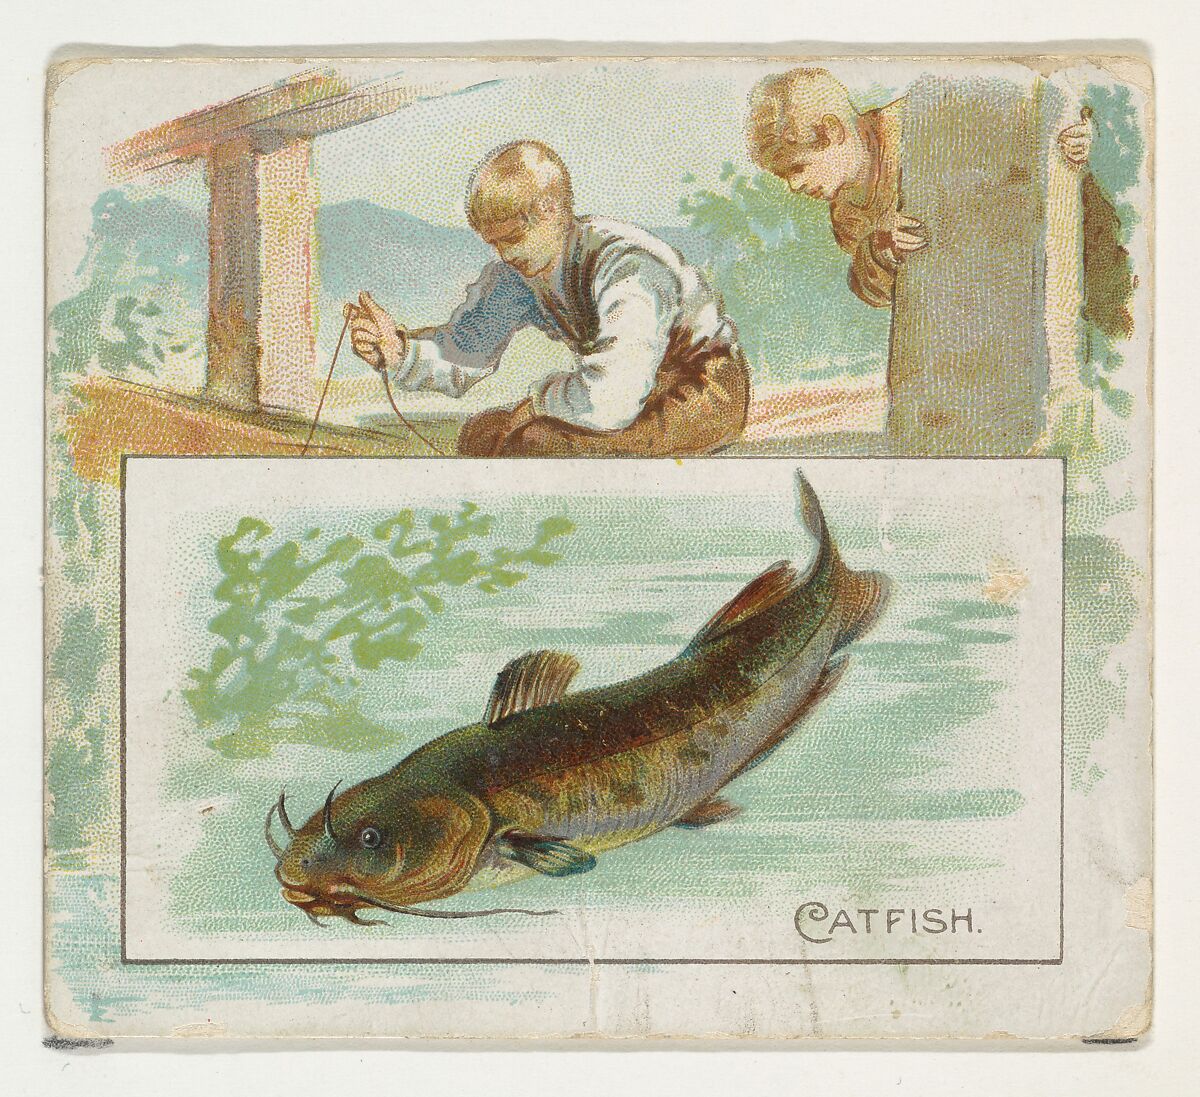 Catfish, from Fish from American Waters series (N39) for Allen & Ginter Cigarettes, Issued by Allen &amp; Ginter (American, Richmond, Virginia), Commercial color lithograph 